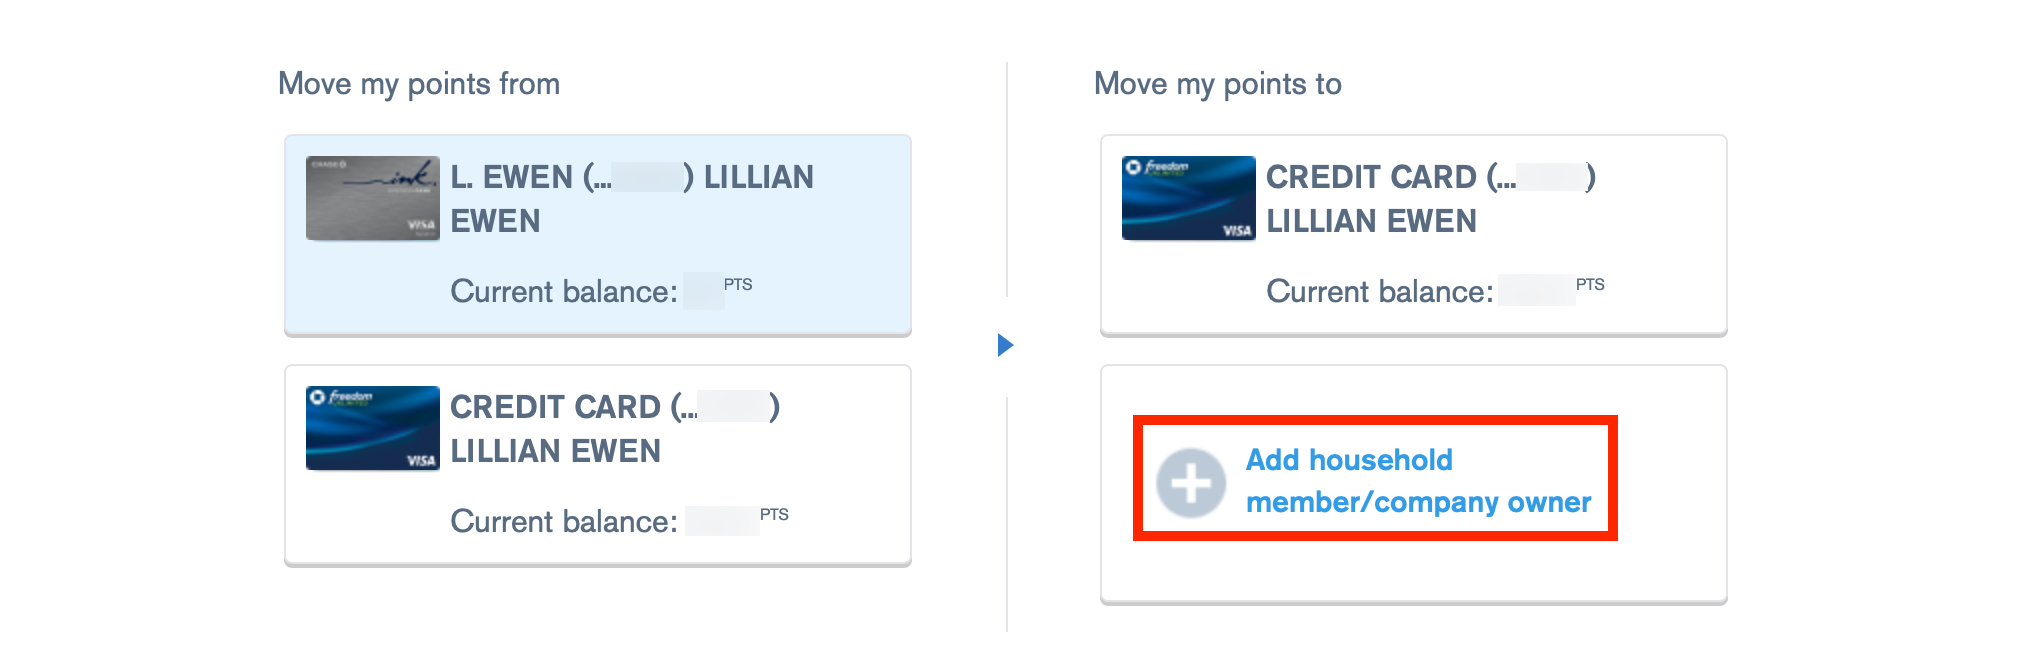 How To Combine Ultimate Rewards Points Between Two Chase Cards